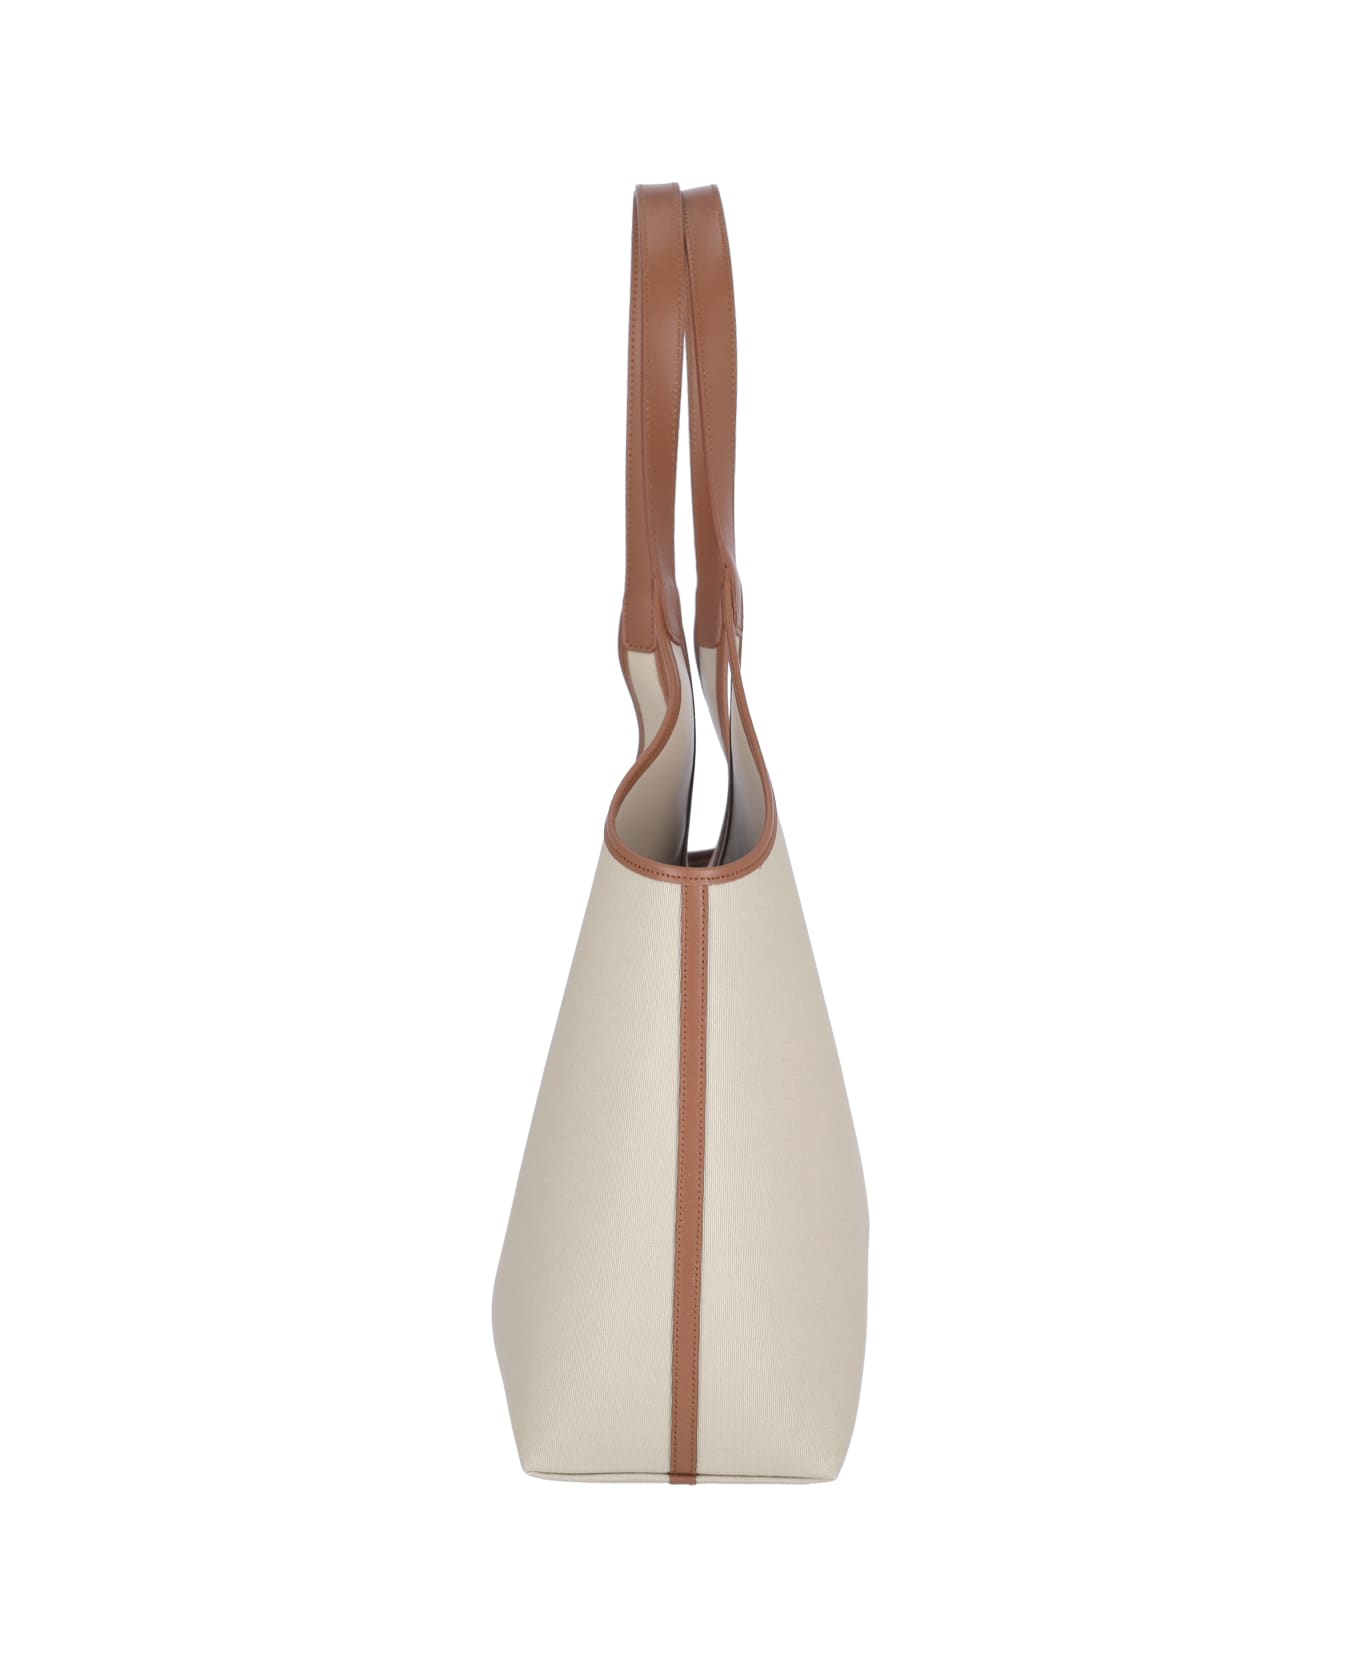 Aesther Ekme 'cabas' Tote Bag - Beige